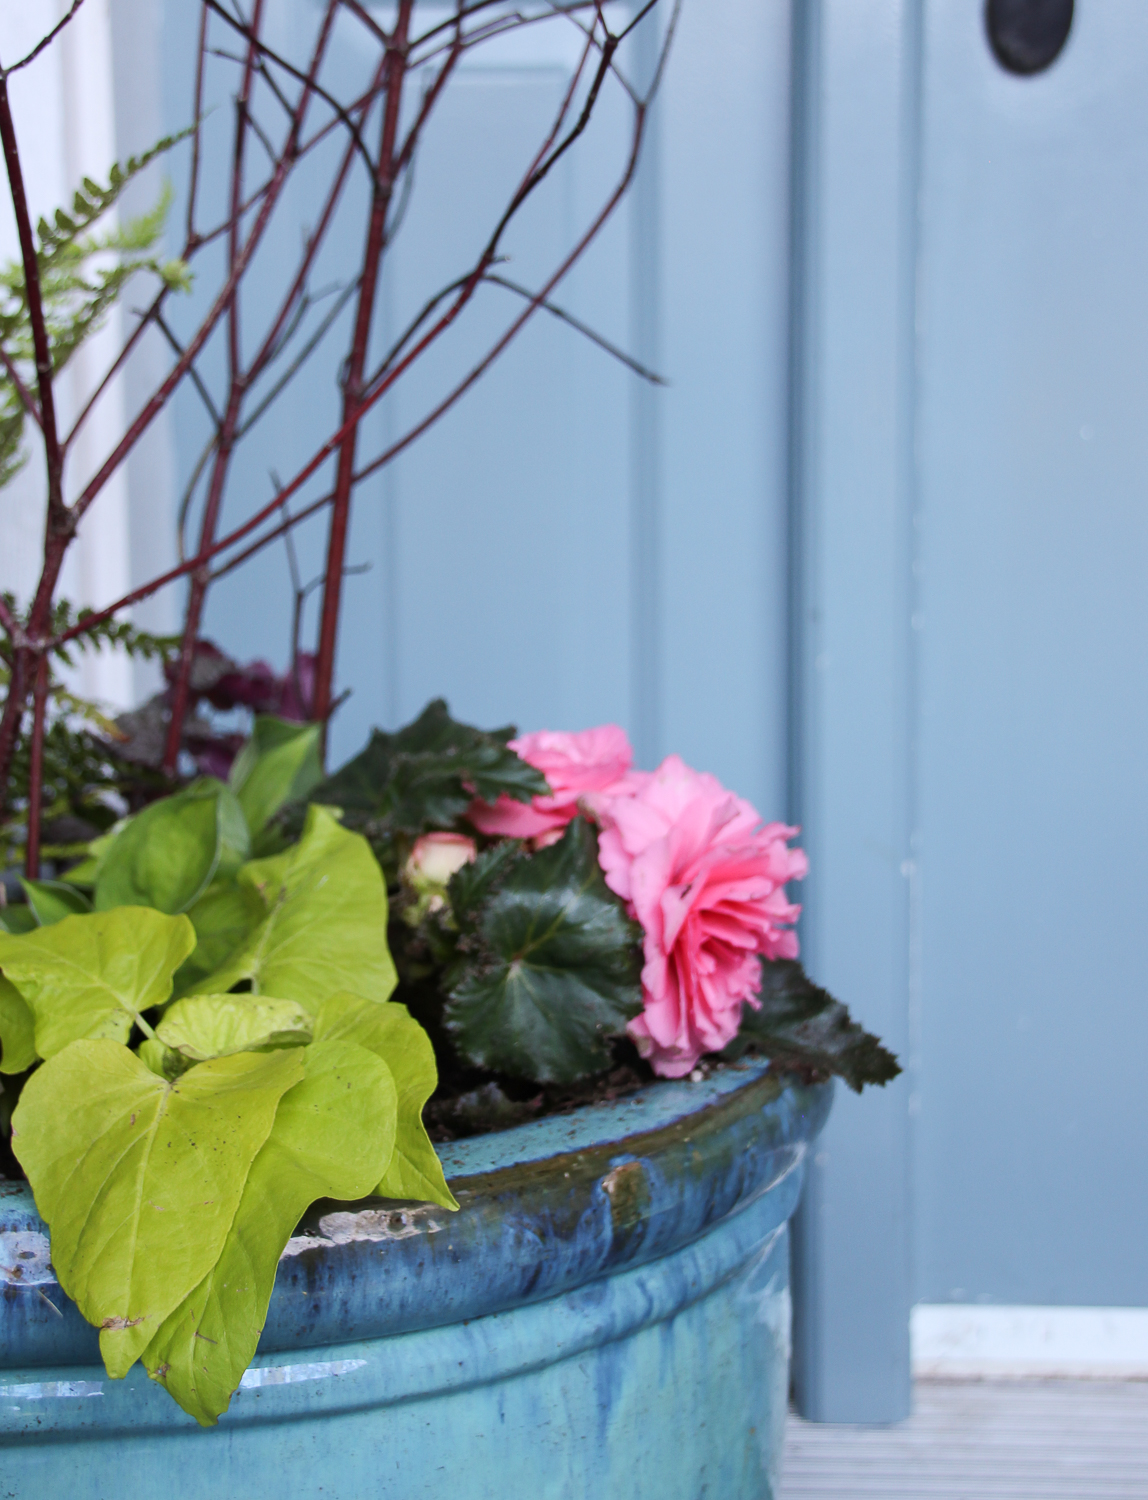 A pink flowering plant and bright green leafed plant in the pots on the porch.